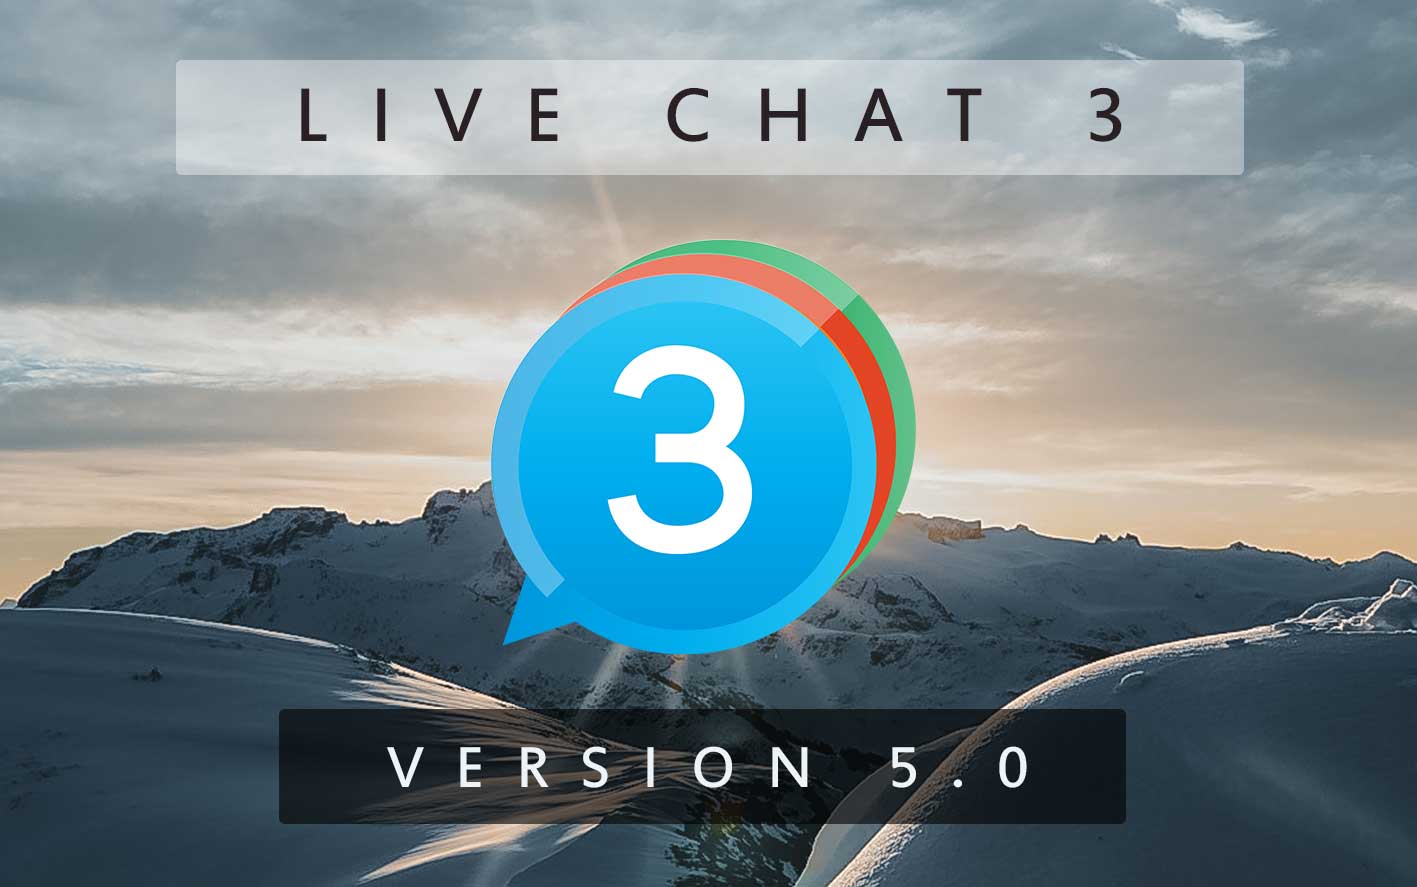 Live Chat 3 - Version 5.0